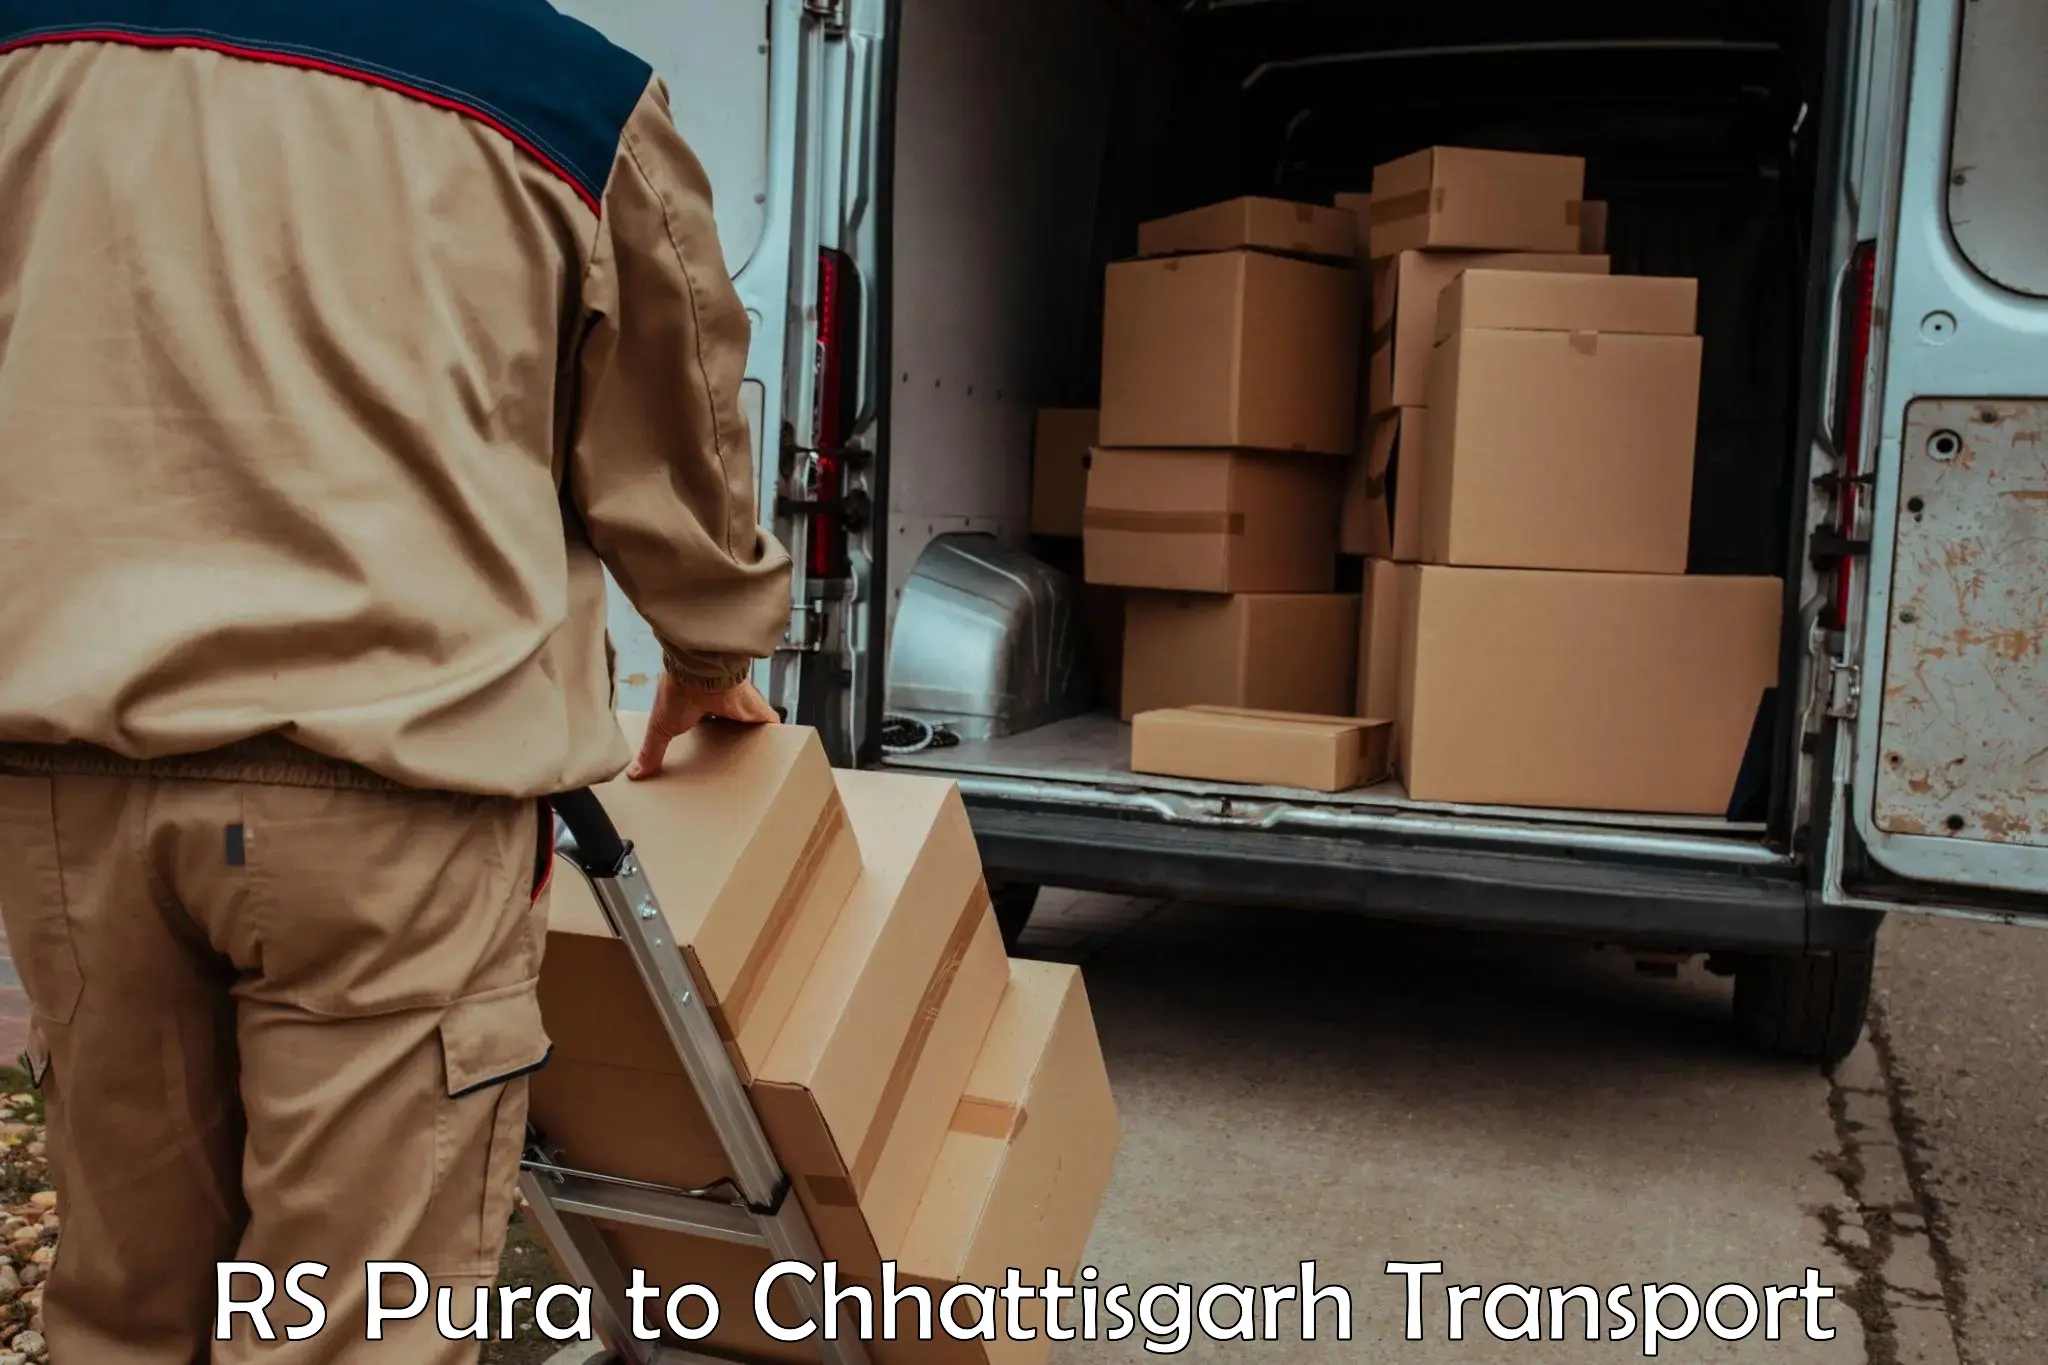 Domestic goods transportation services RS Pura to bagbahra